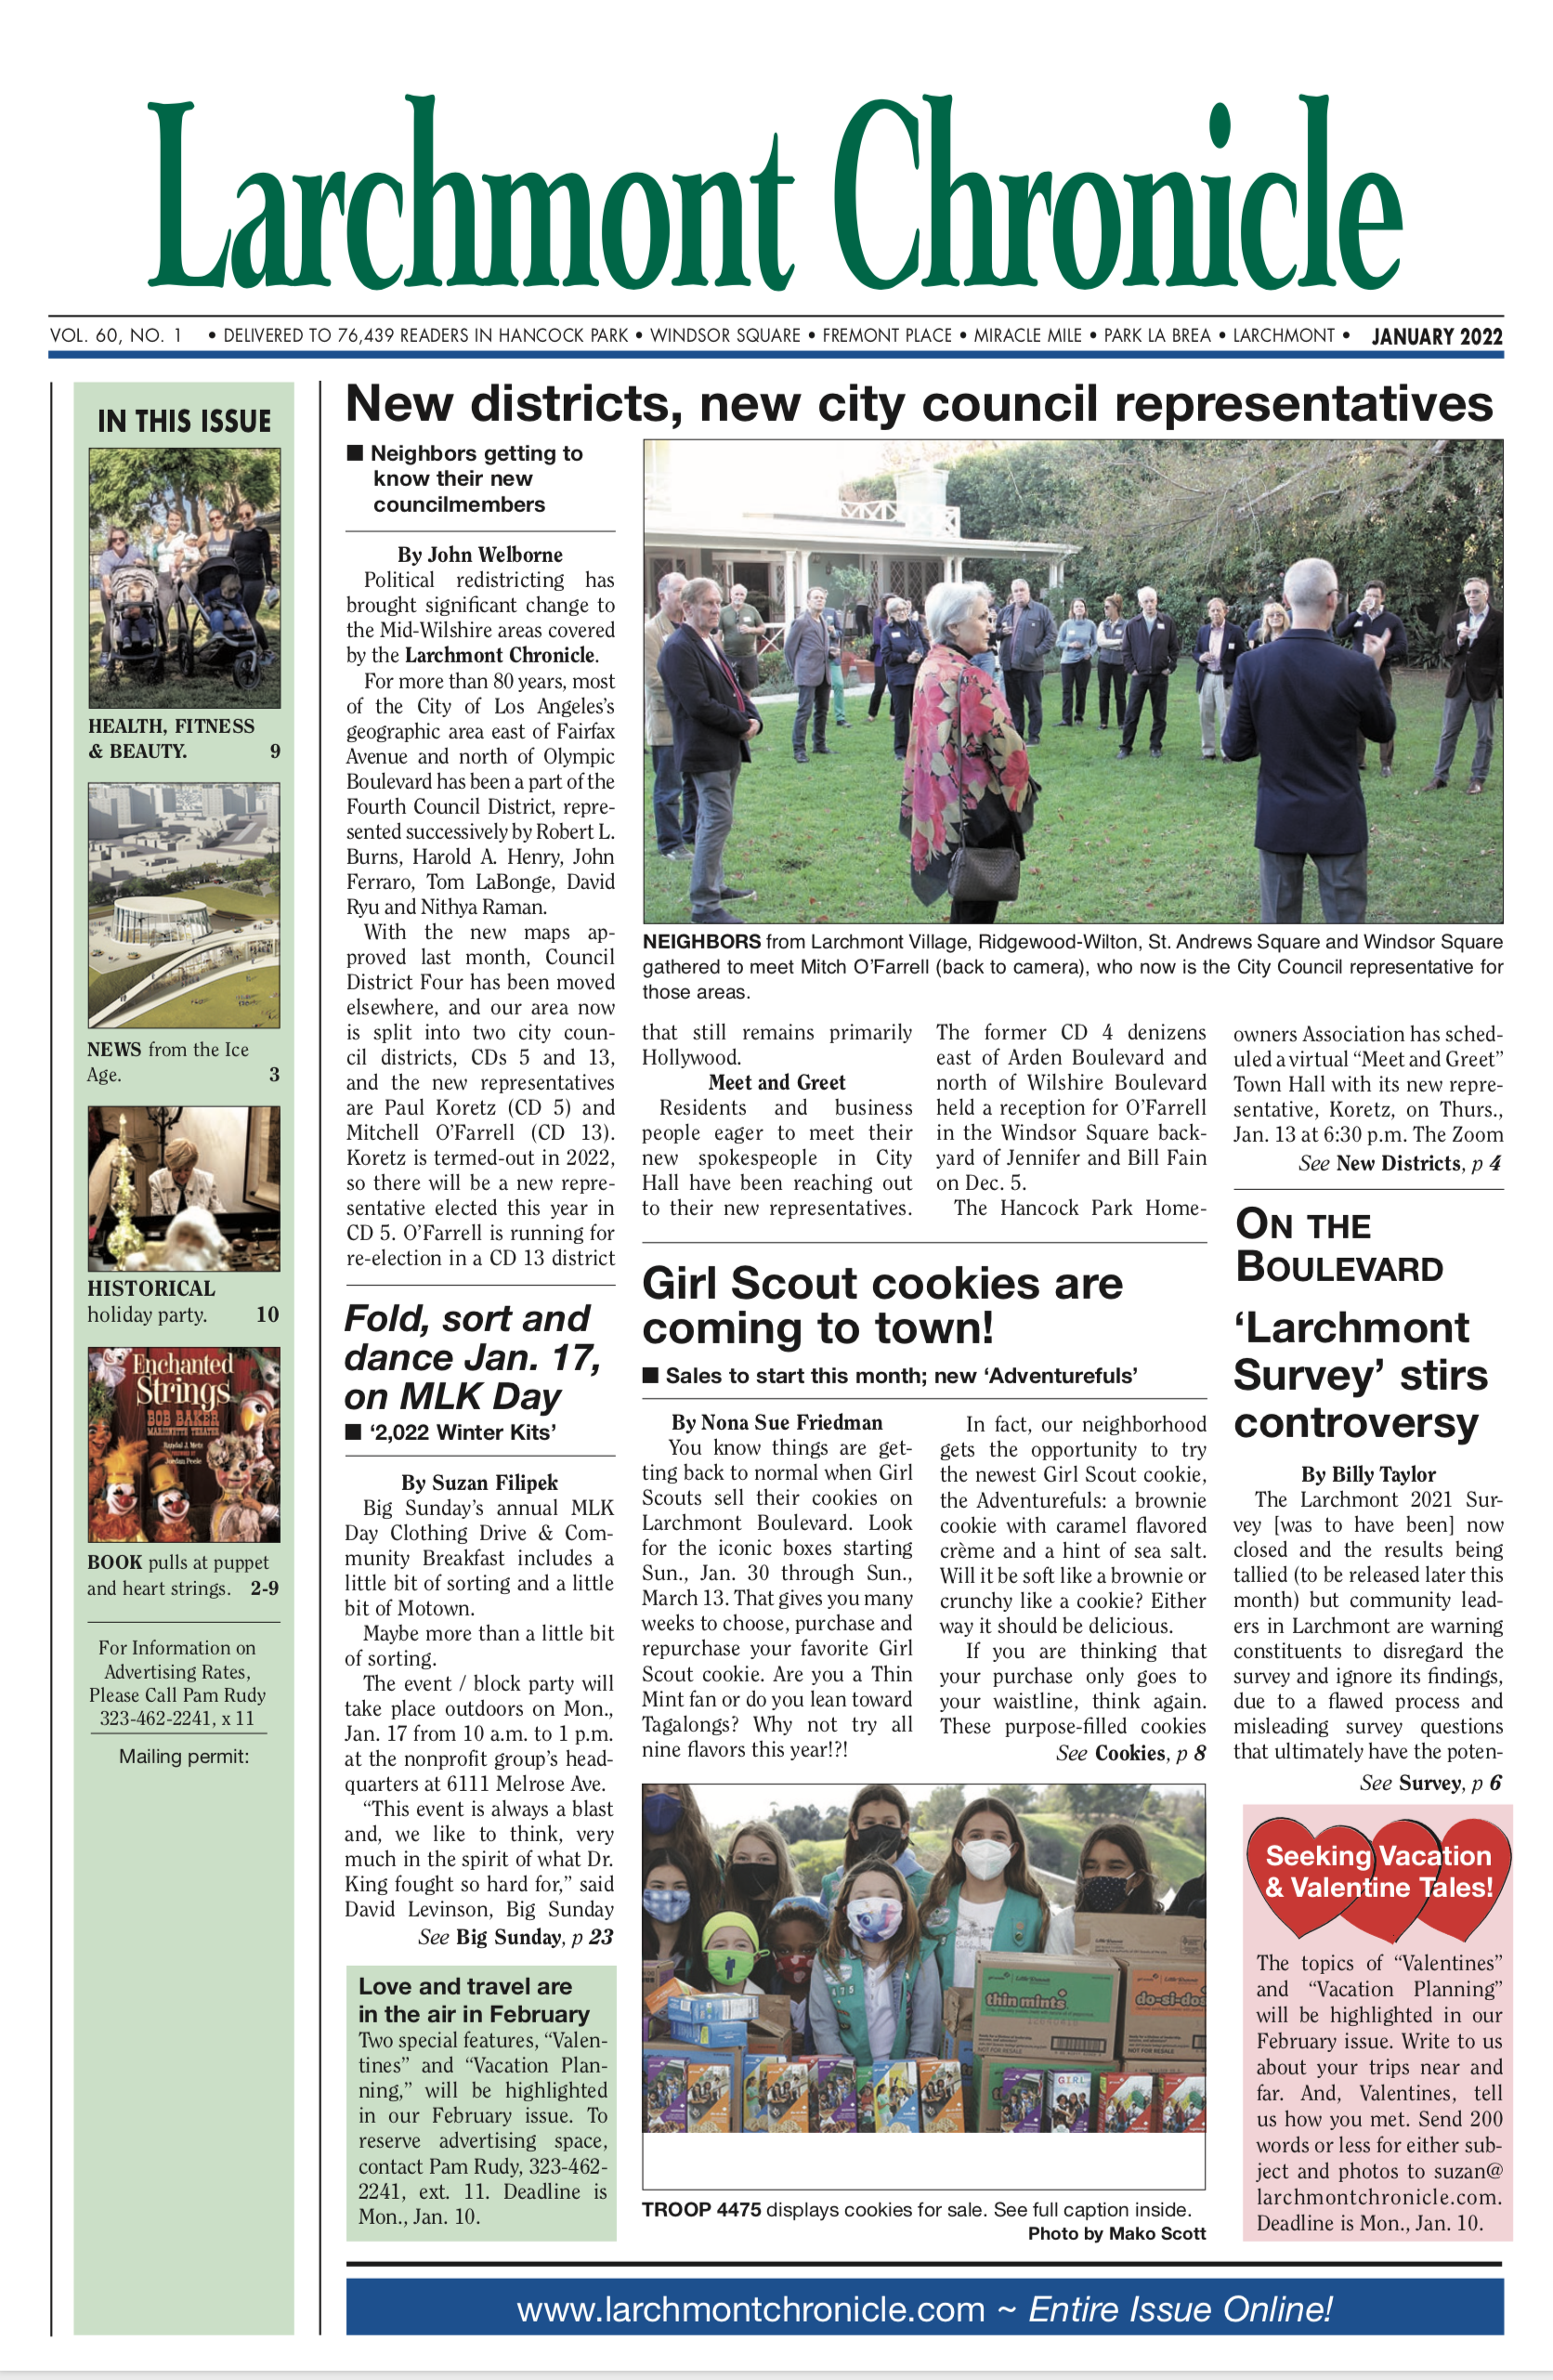 Larchmont Chronicle January 2022 full issue